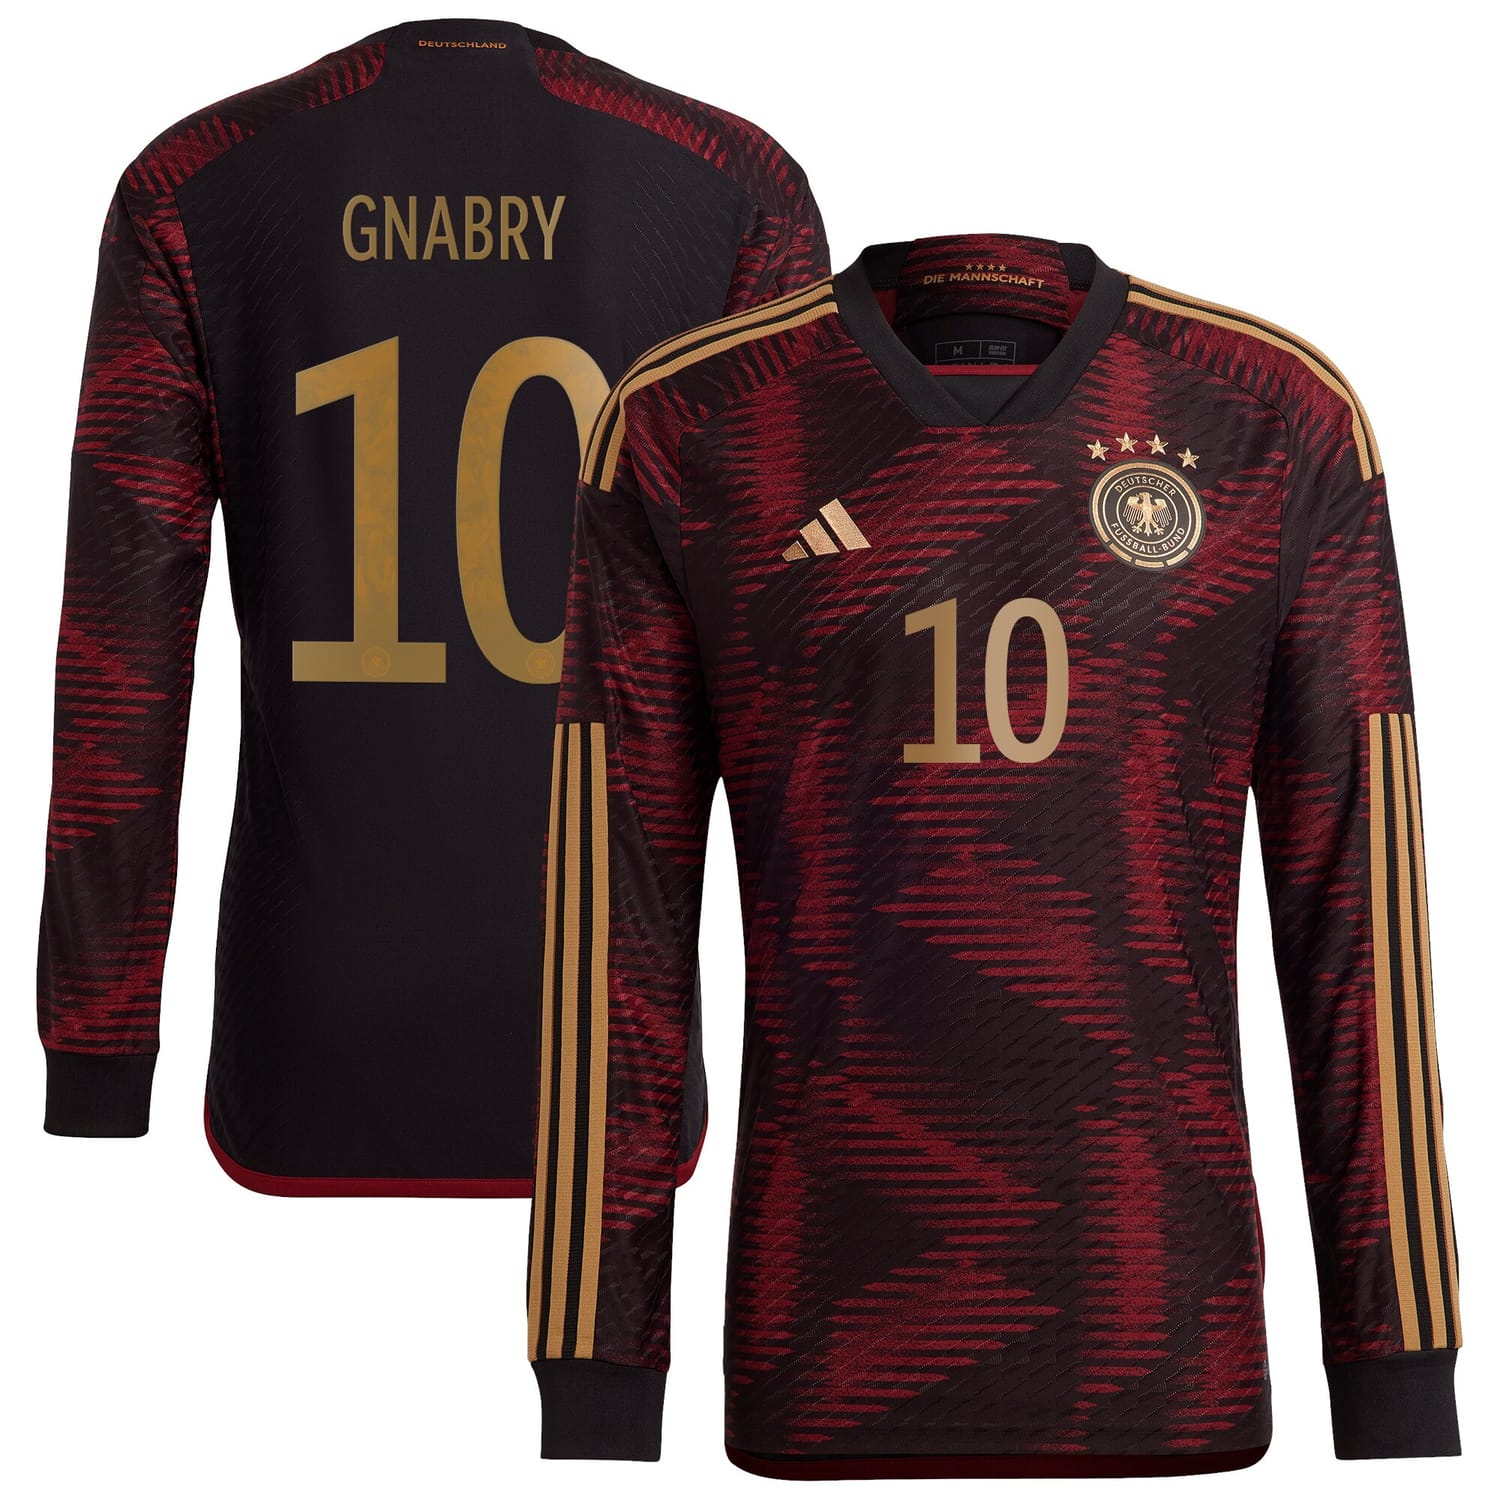 Germany National Team Away Authentic Jersey Shirt Long Sleeve player Serge Gnabry 10 printing for Men